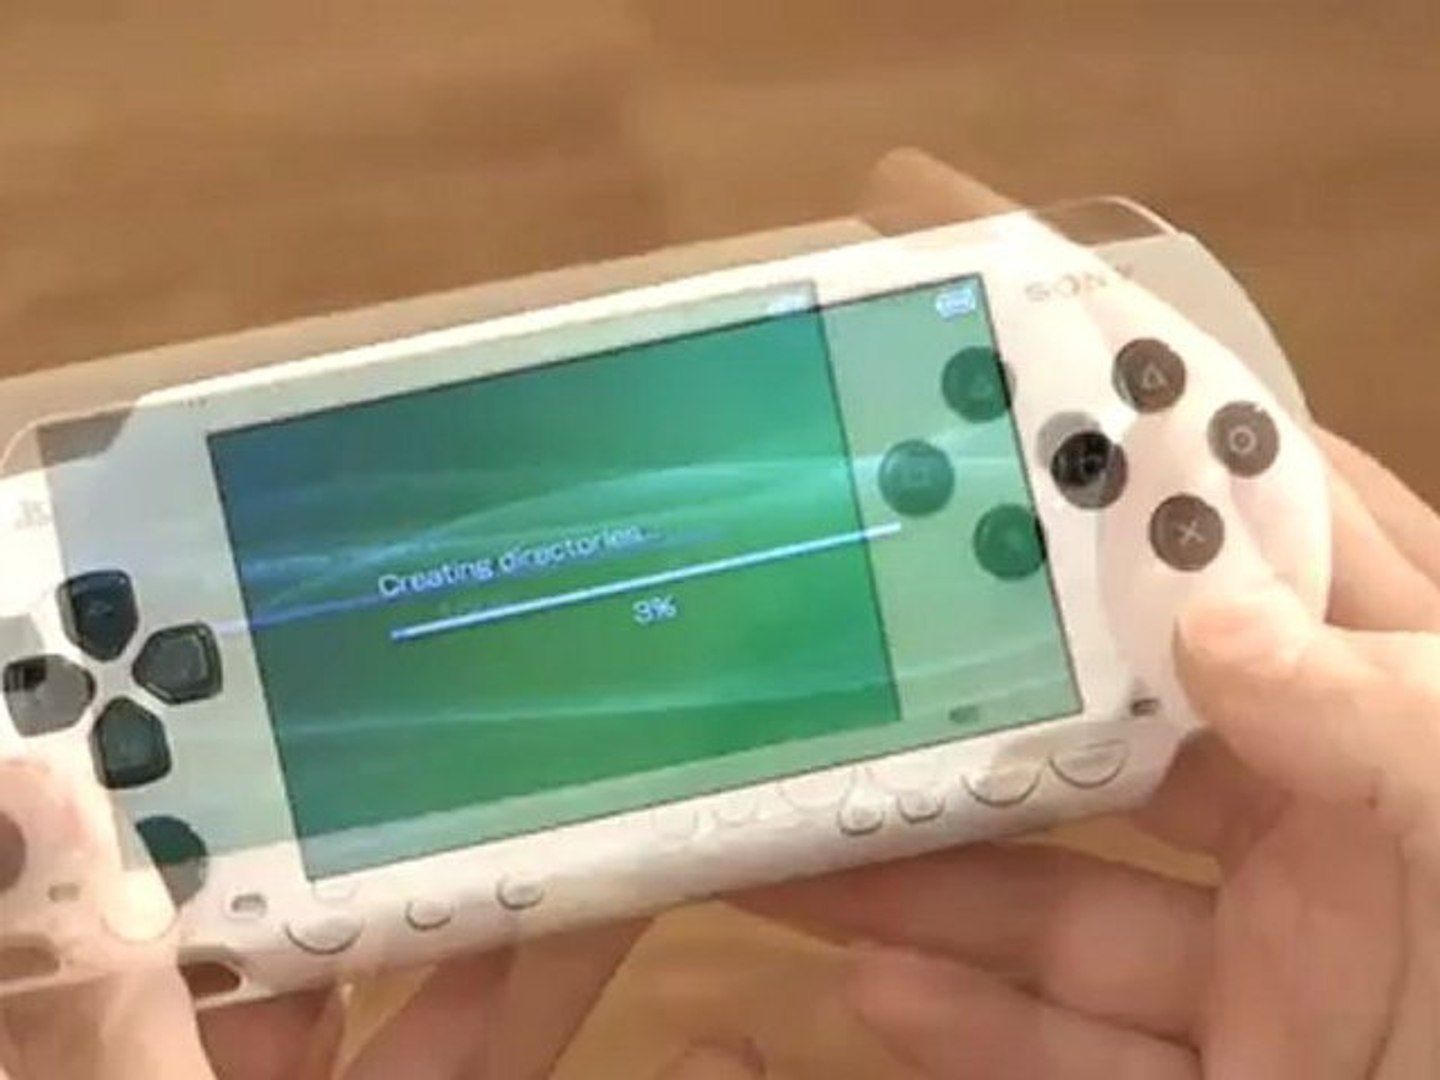 How To Fix A Bricked Psp - video Dailymotion